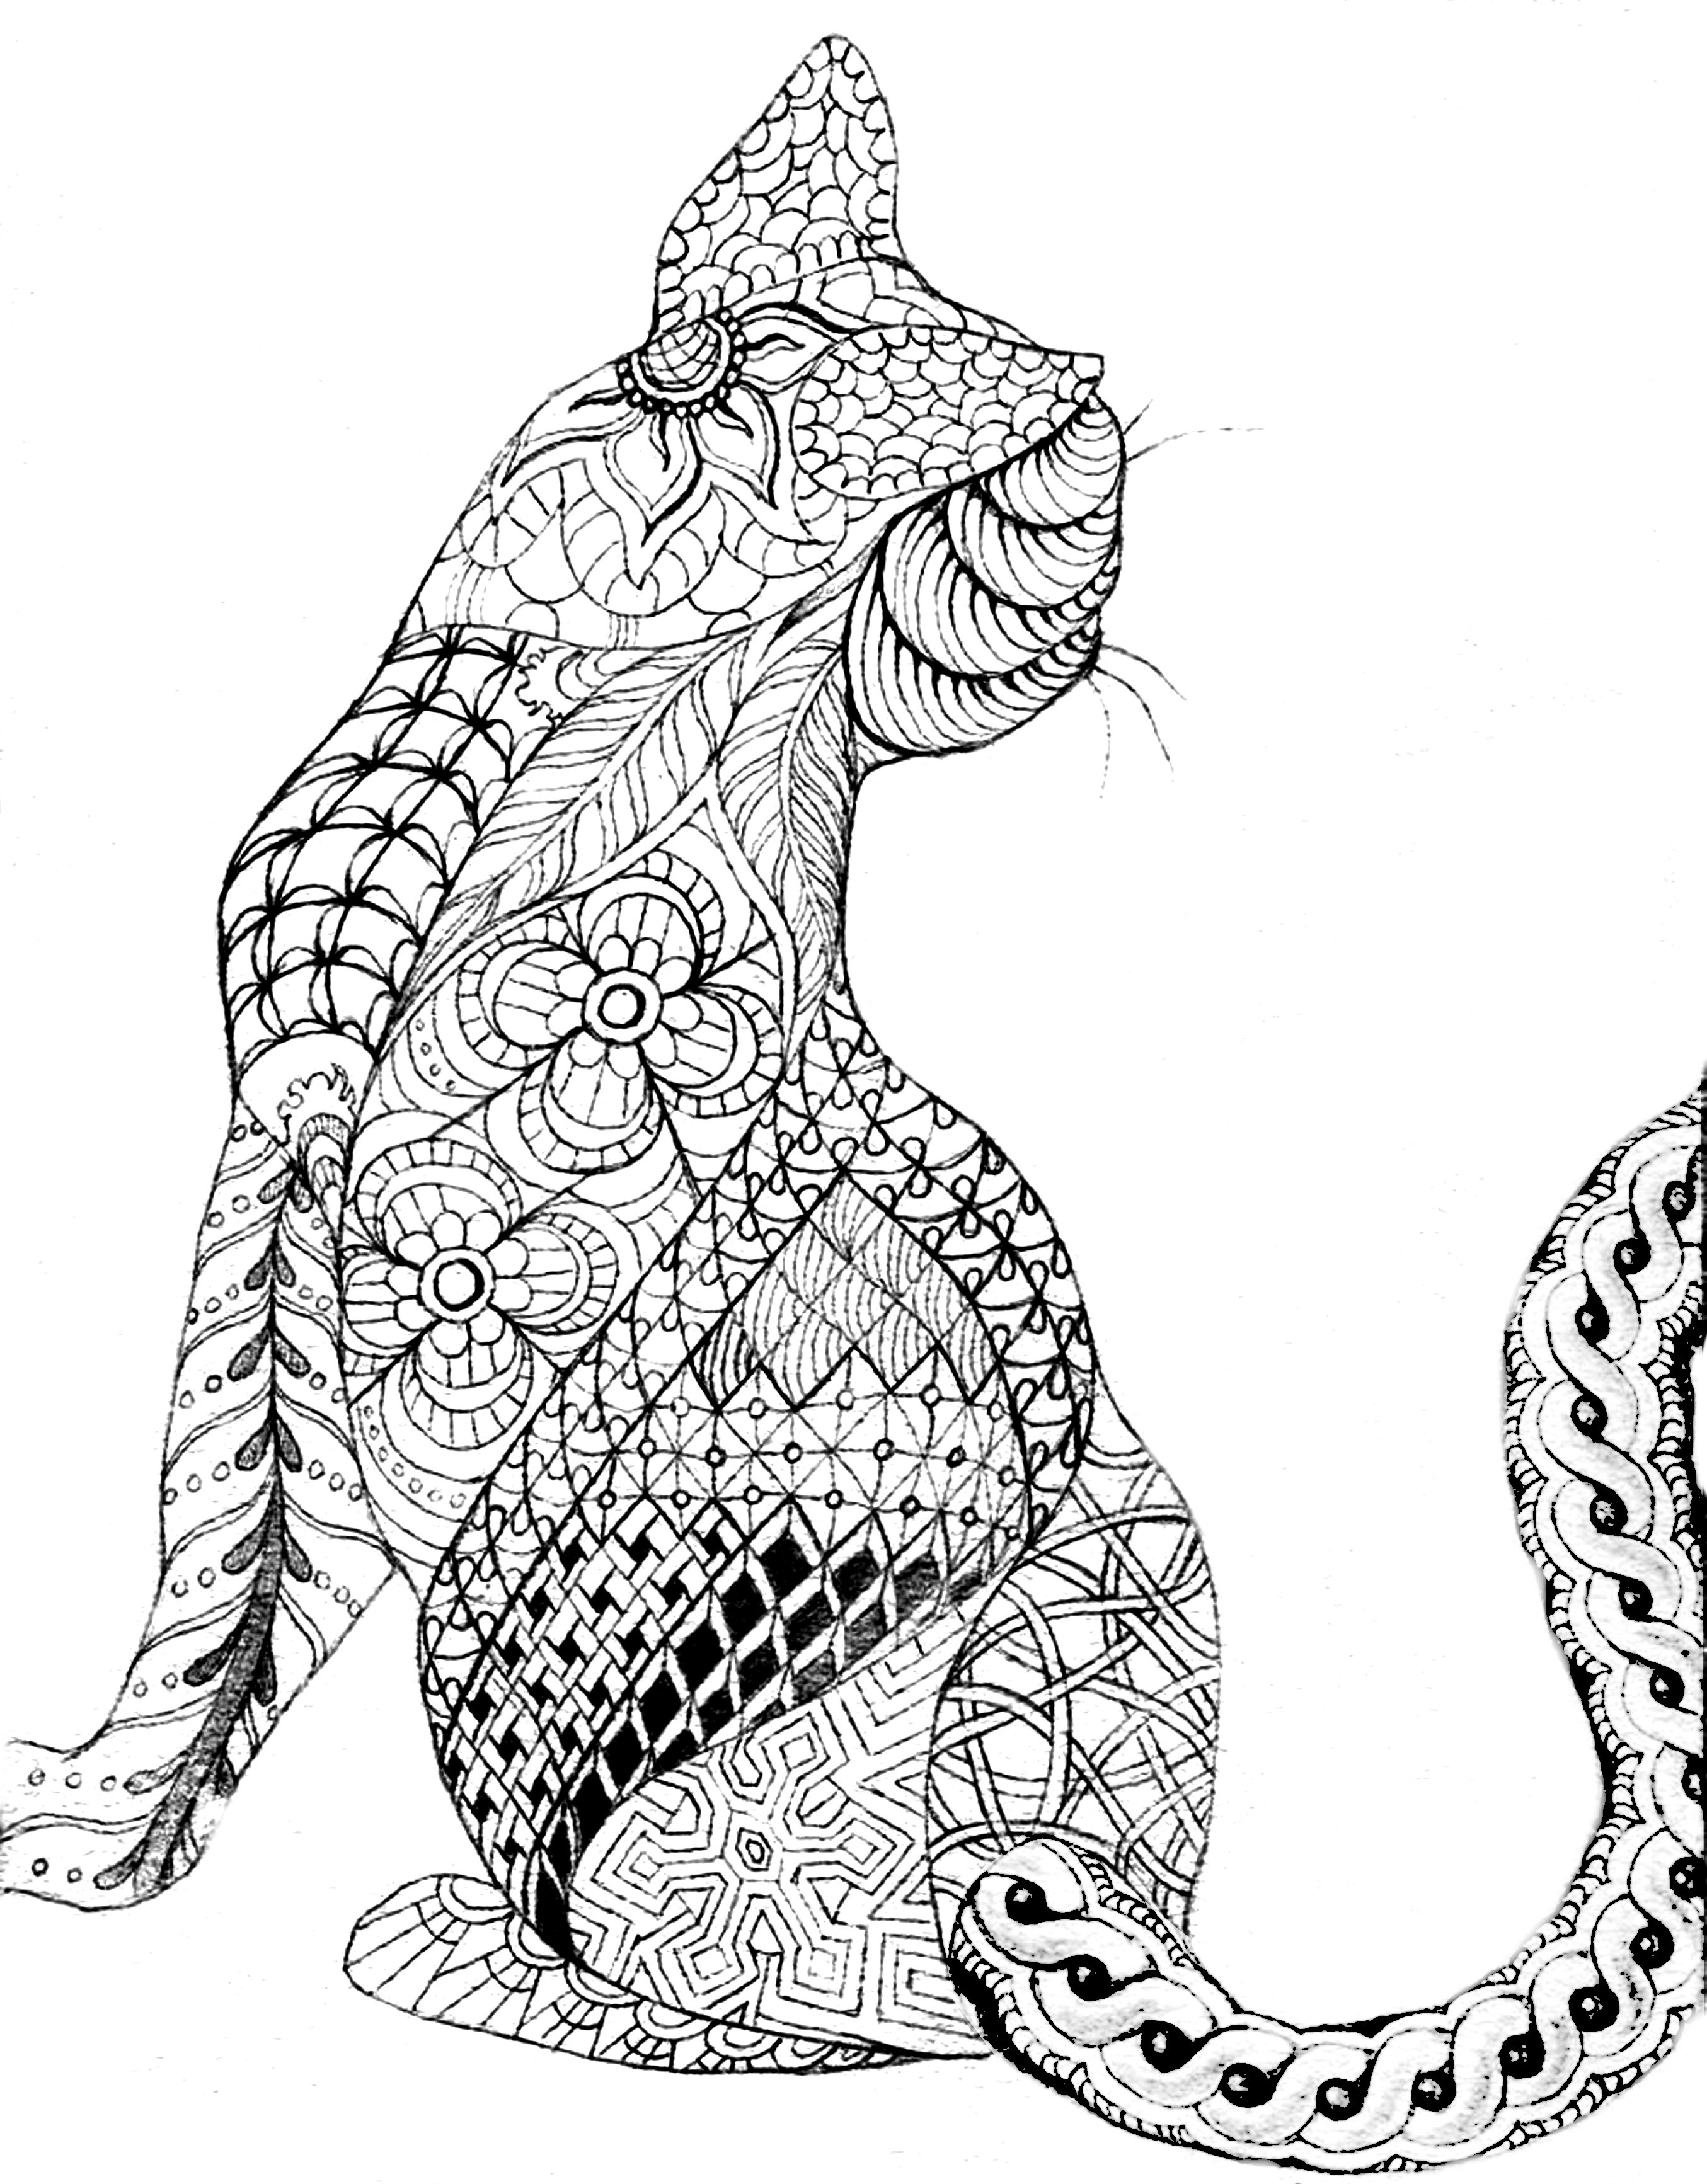 Adult Coloring Pages Animal Patterns
 Free Printable Adult Coloring Pages